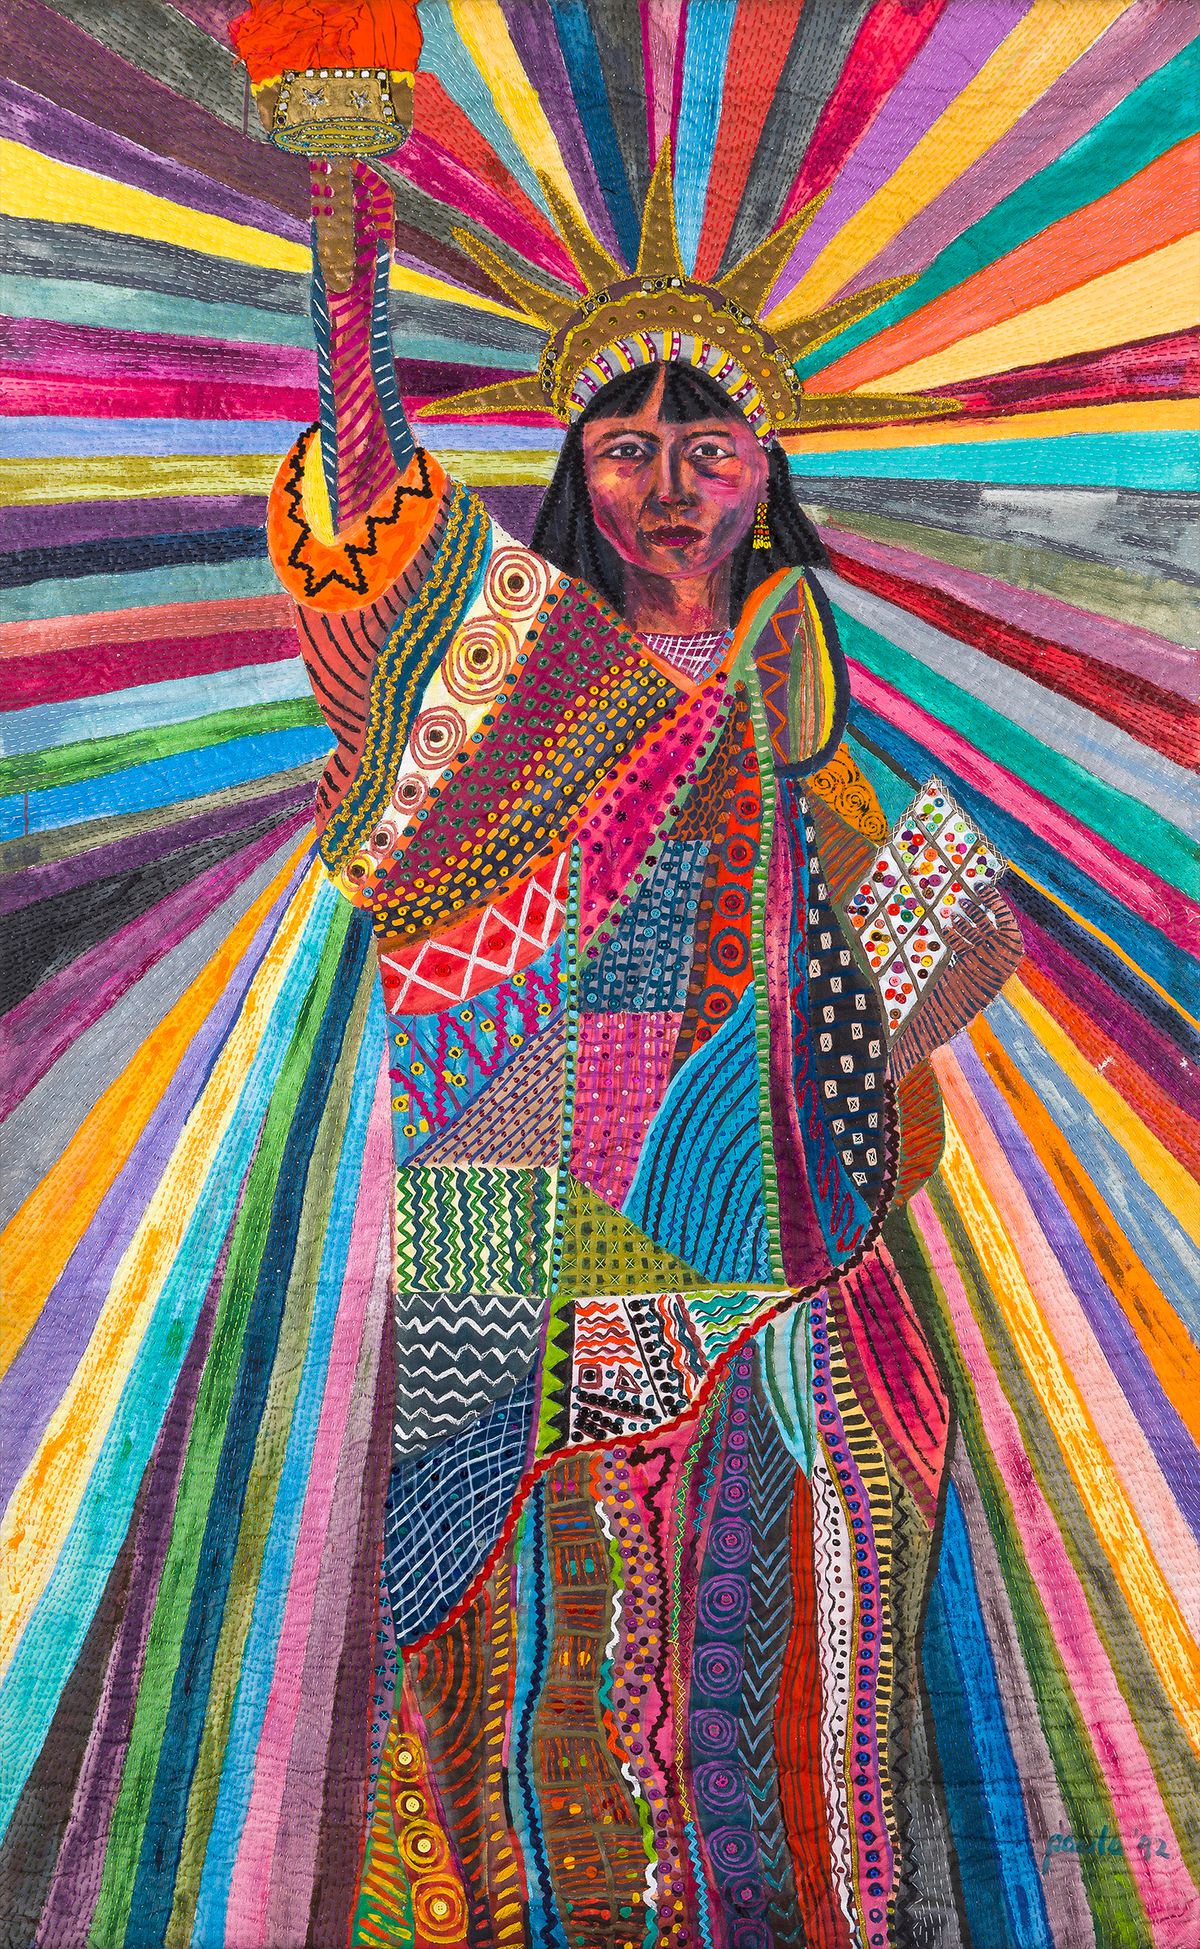 Pacita Abad's L.A. Liberty (1992) will feature in the fair's new Woven section dedicated to textile artists. Courtesy of Silverlens Galleries